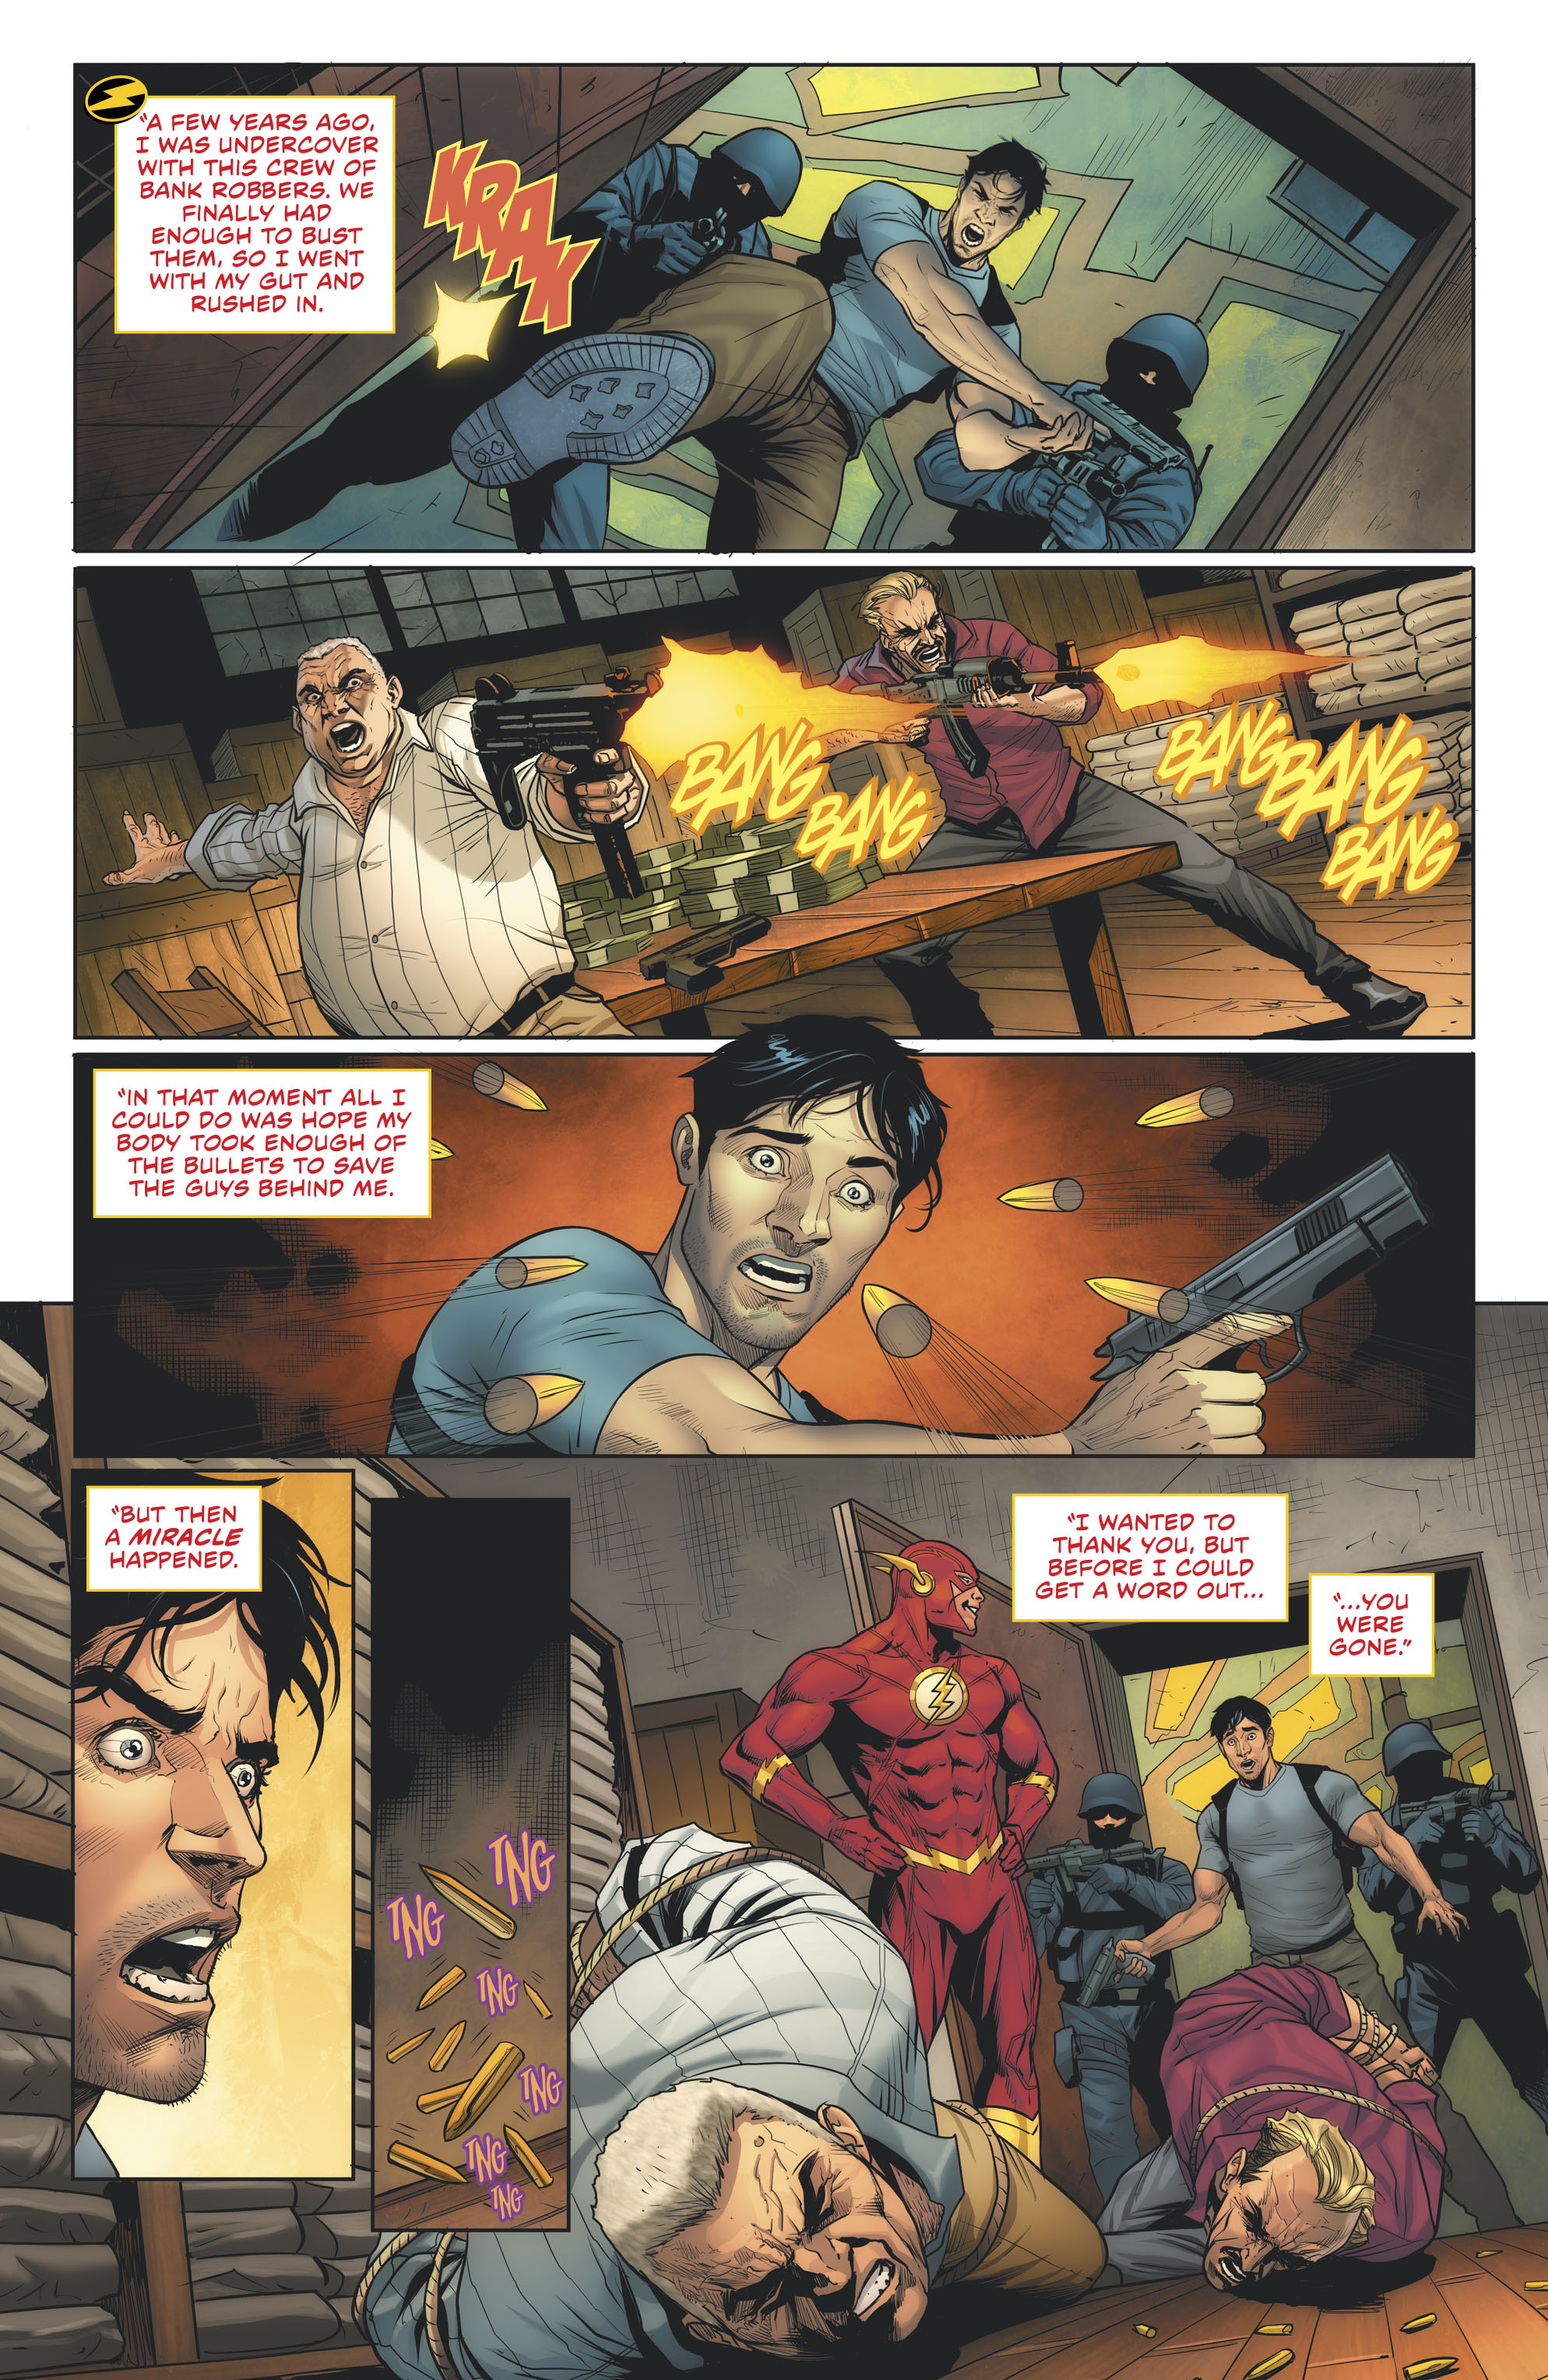 The Flash (2016-): Chapter 751 - Page 3